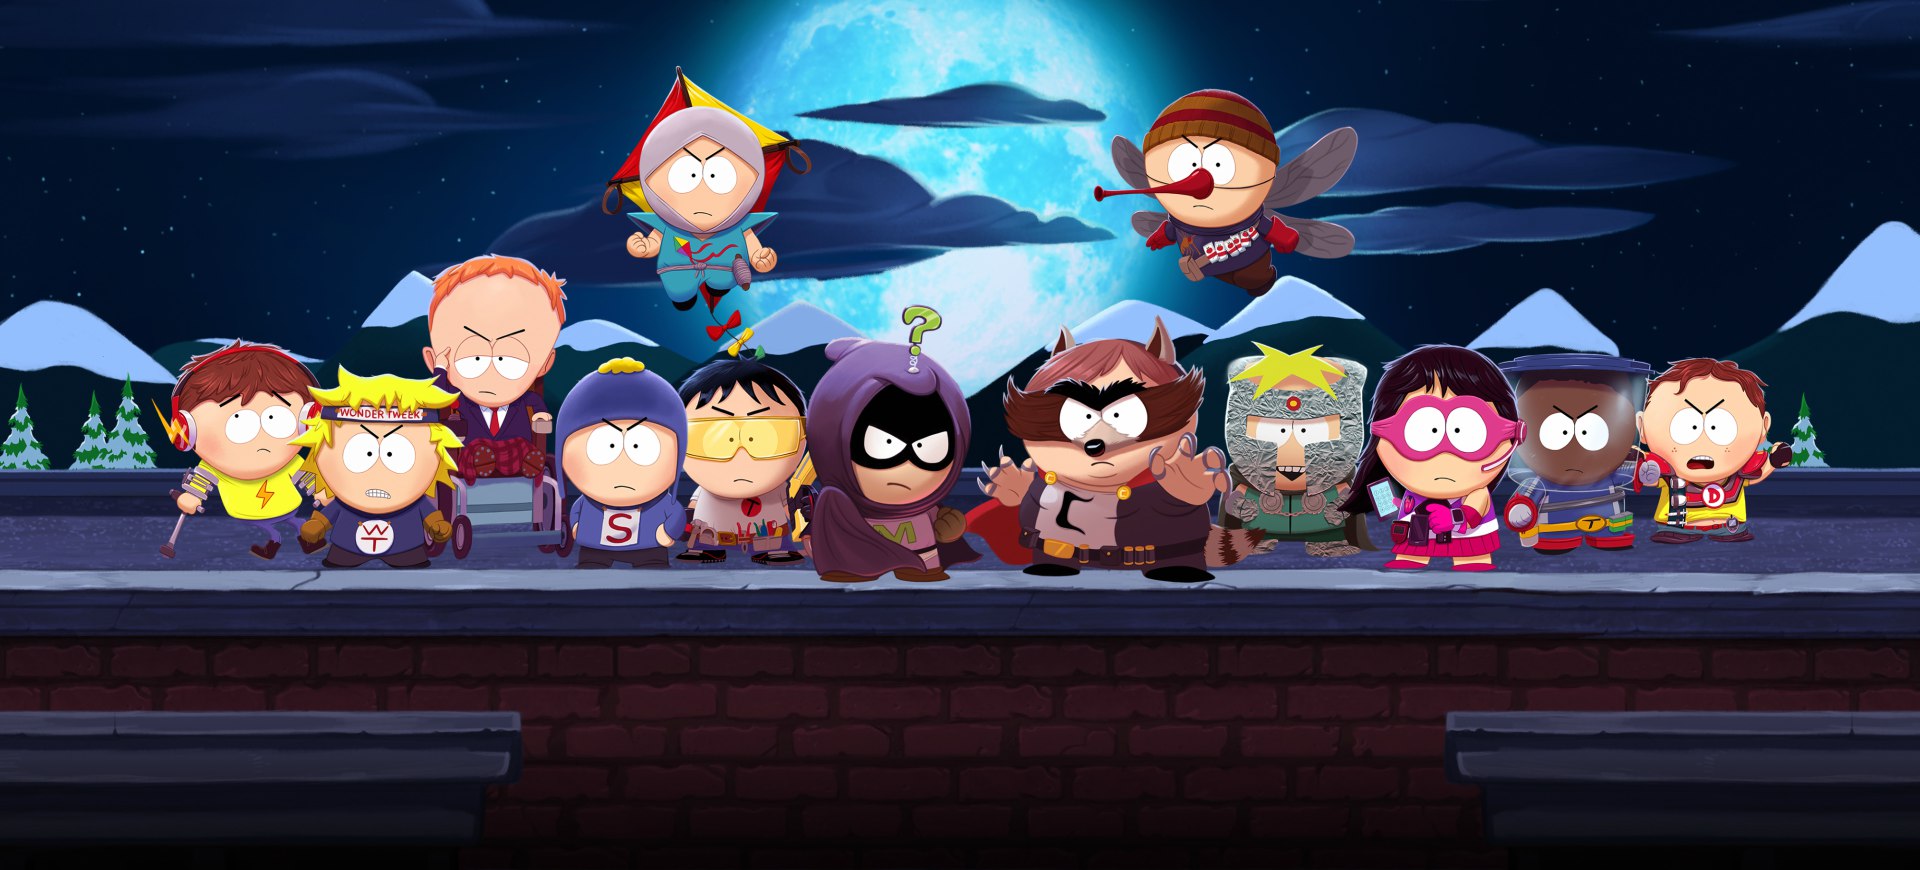 South Park: The Fractured But Whole chính thức ra mắt - Tin Game